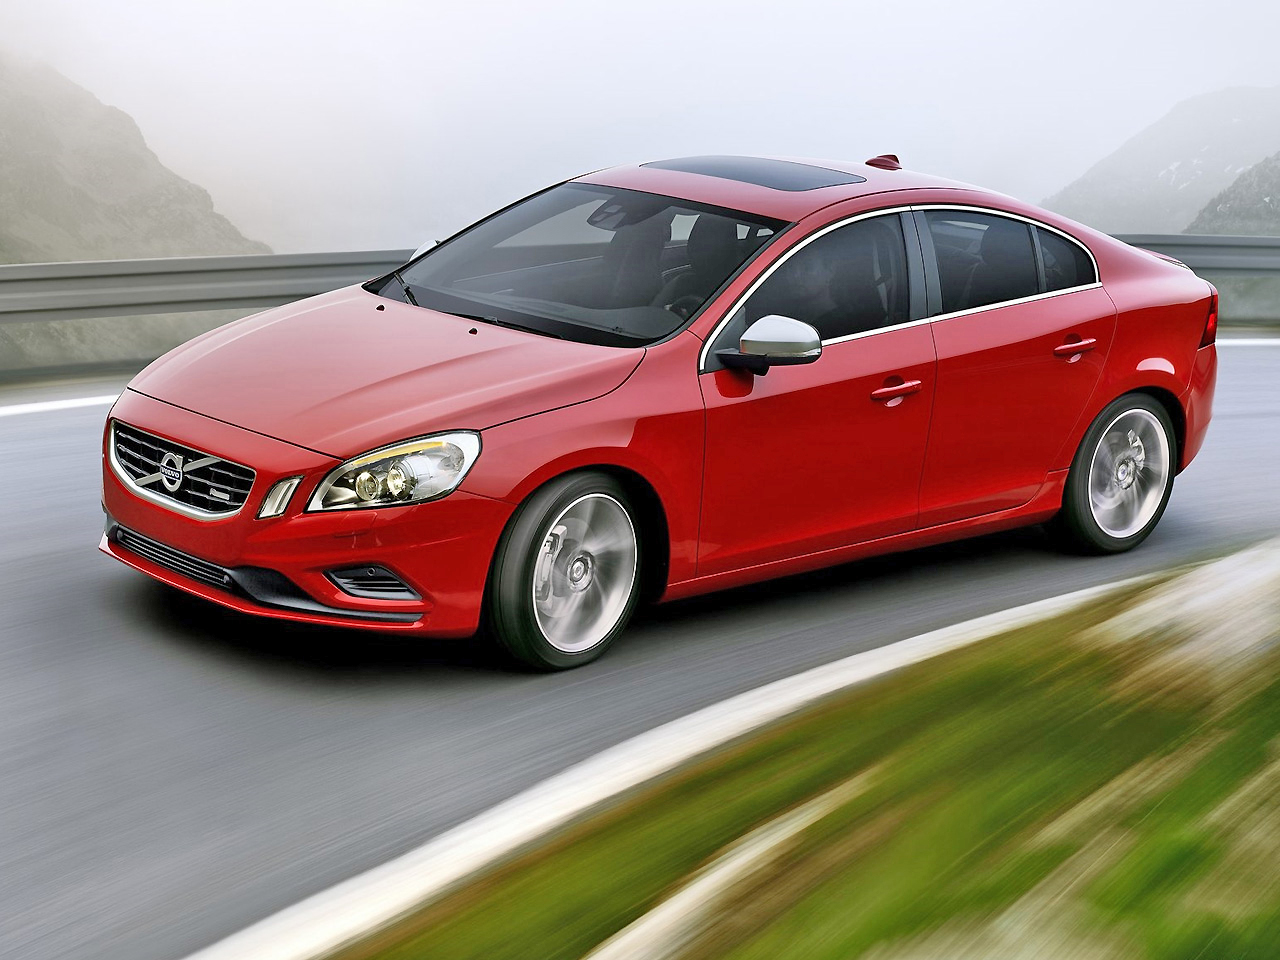 Enter any best looking car competition, and the new Volvo S60 won't be far off the podium.